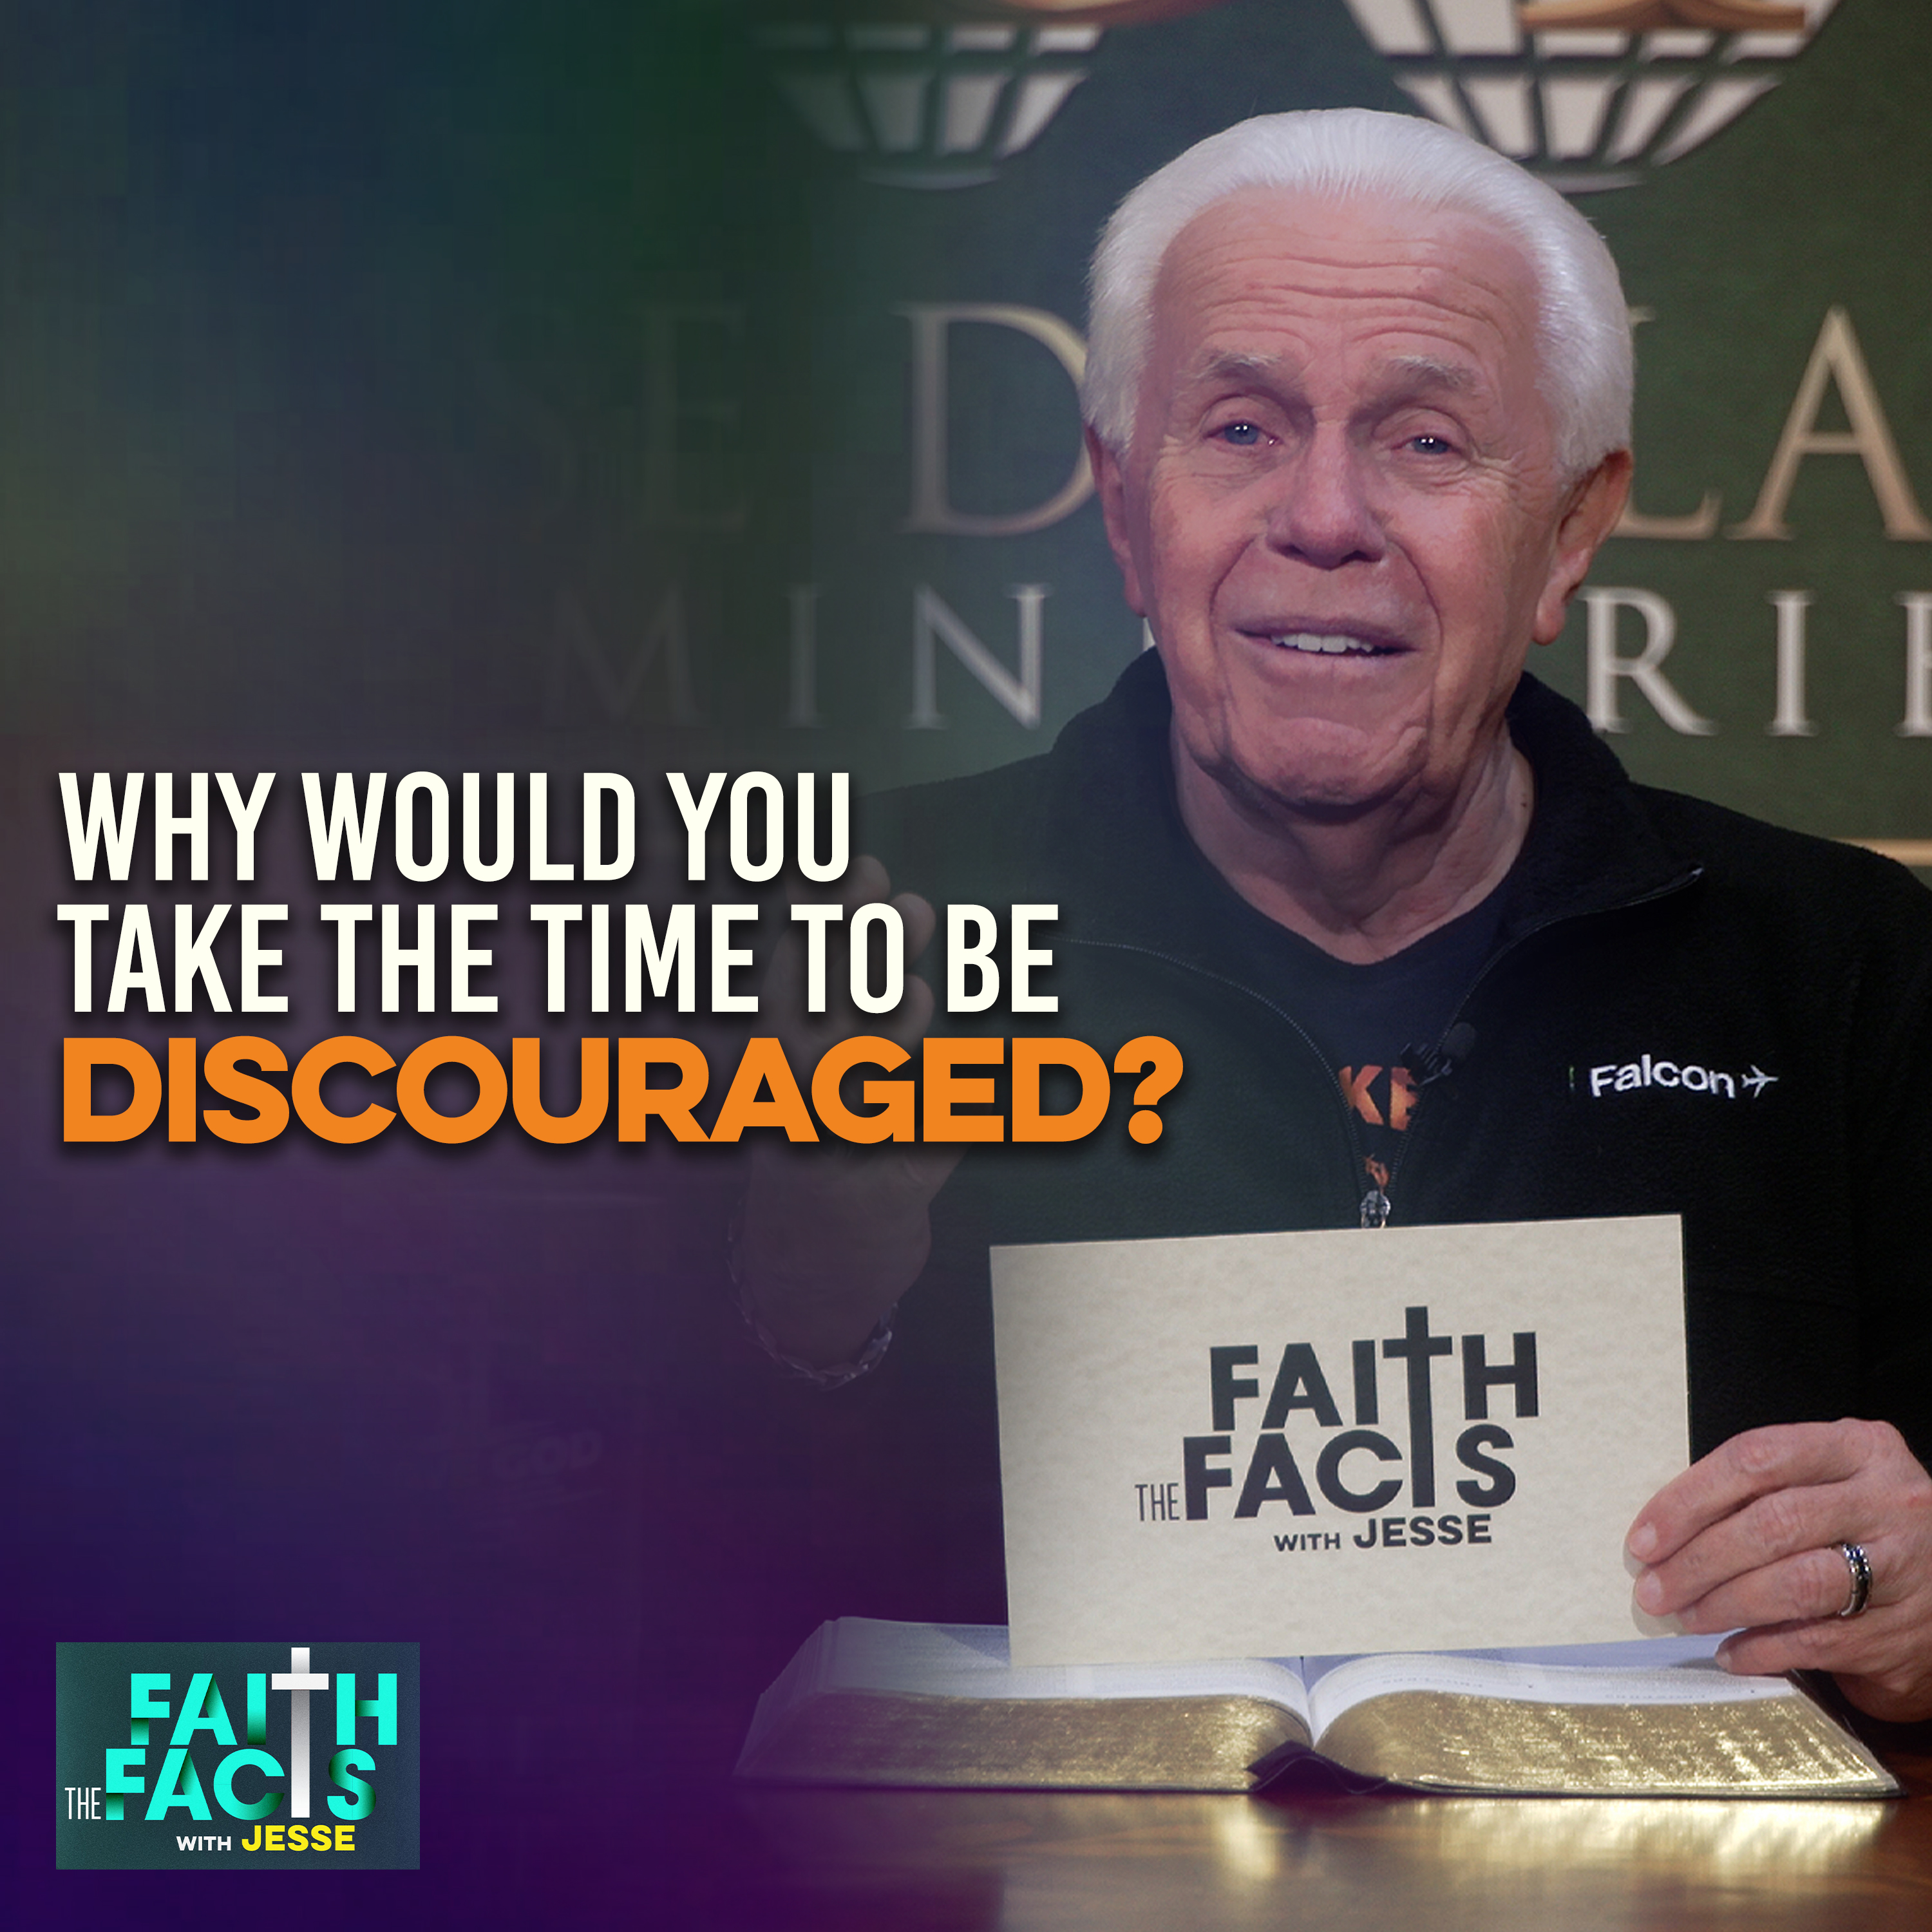 Why Would You Take The Time To Be Discouraged?